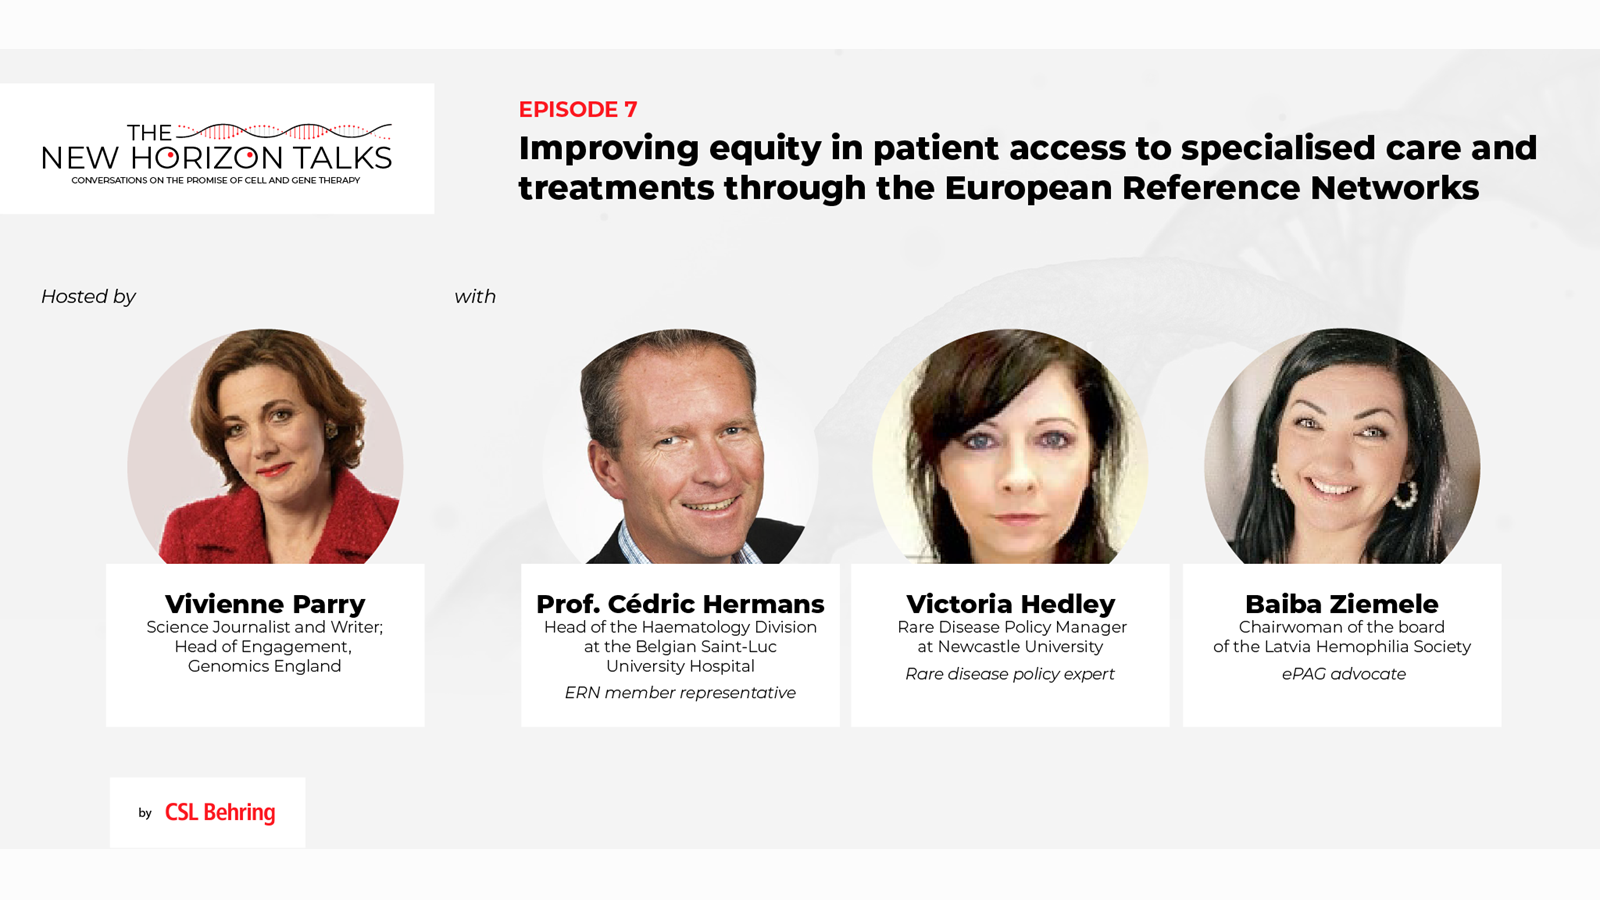 Image featuring panelists of Episode 7 of the New Horizon Podcast about improving equity in patient access to specialized care and treatments through the European Reference Networks